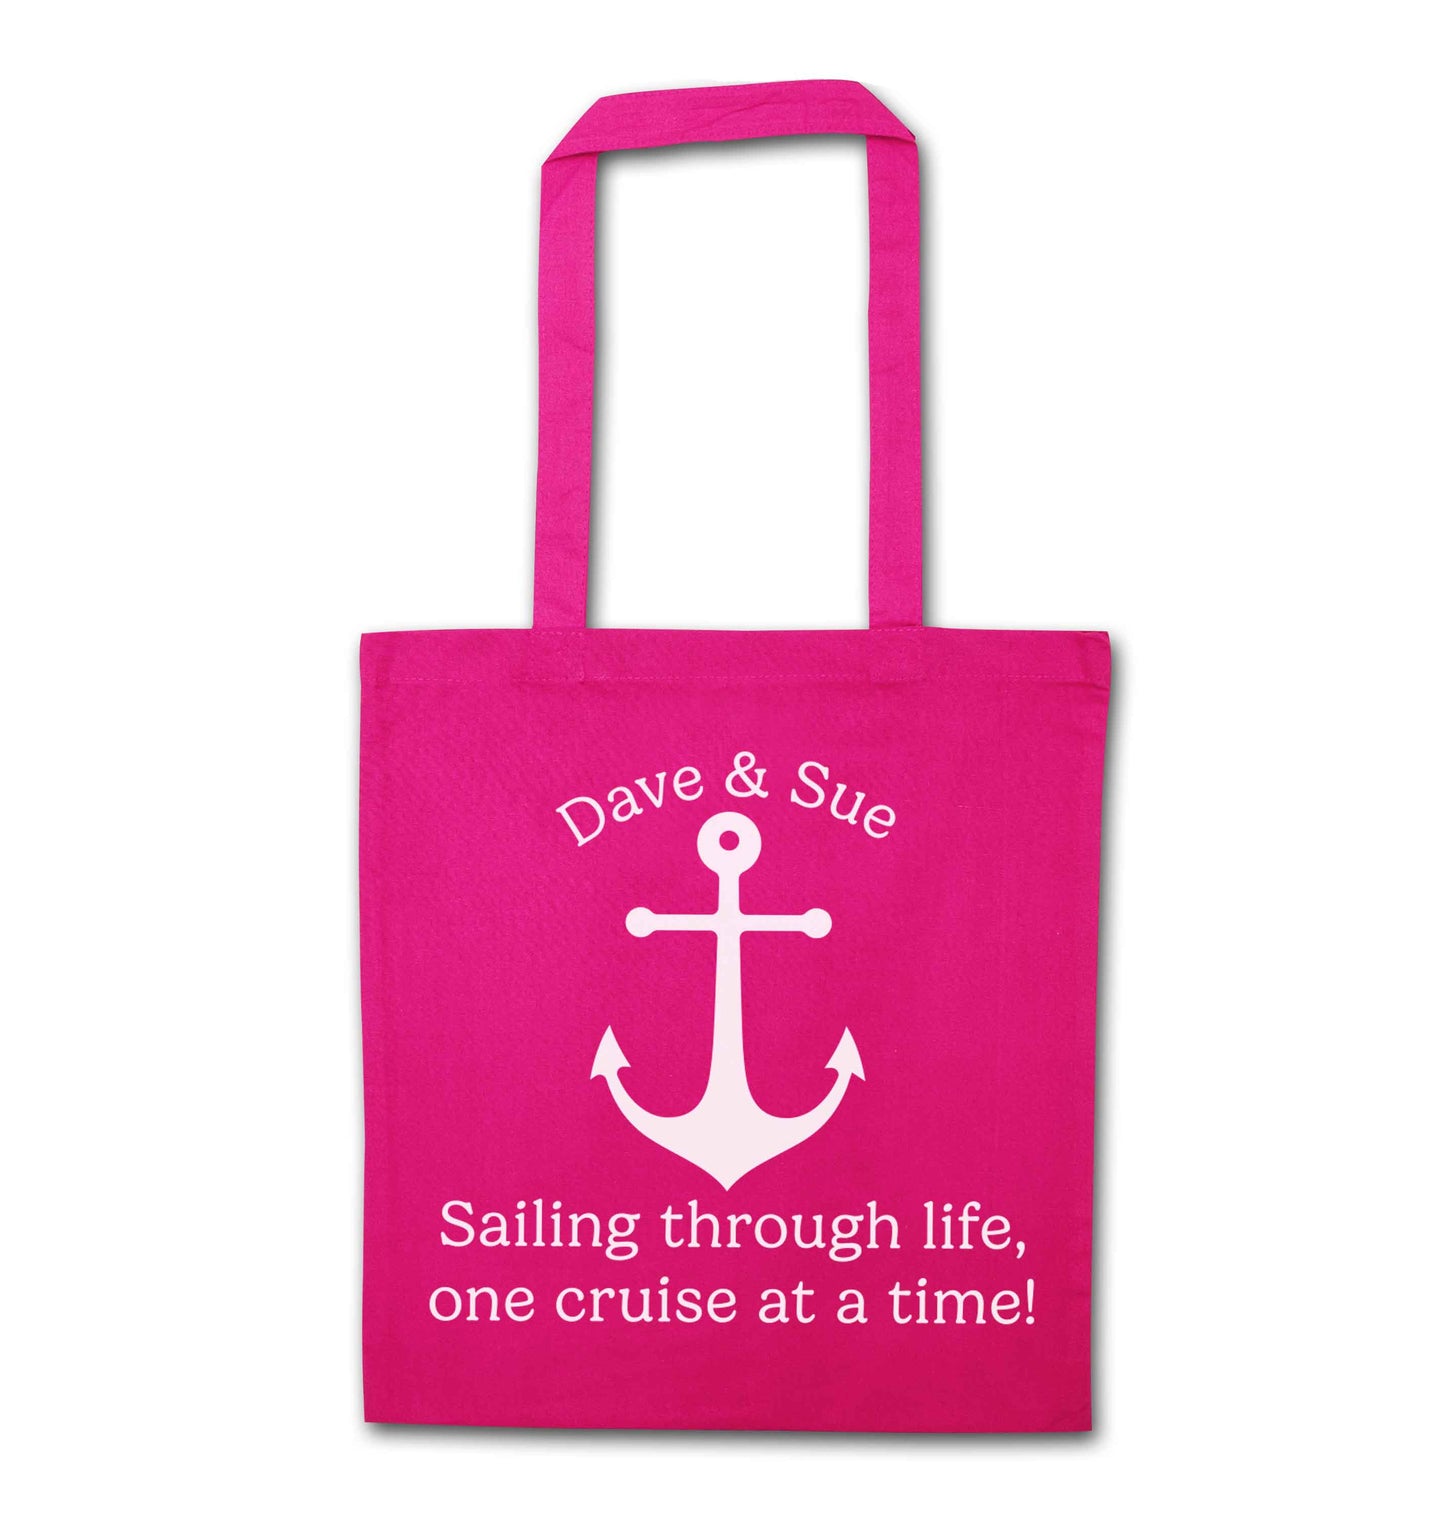 Sailing through life one cruise at a time - personalised pink tote bag